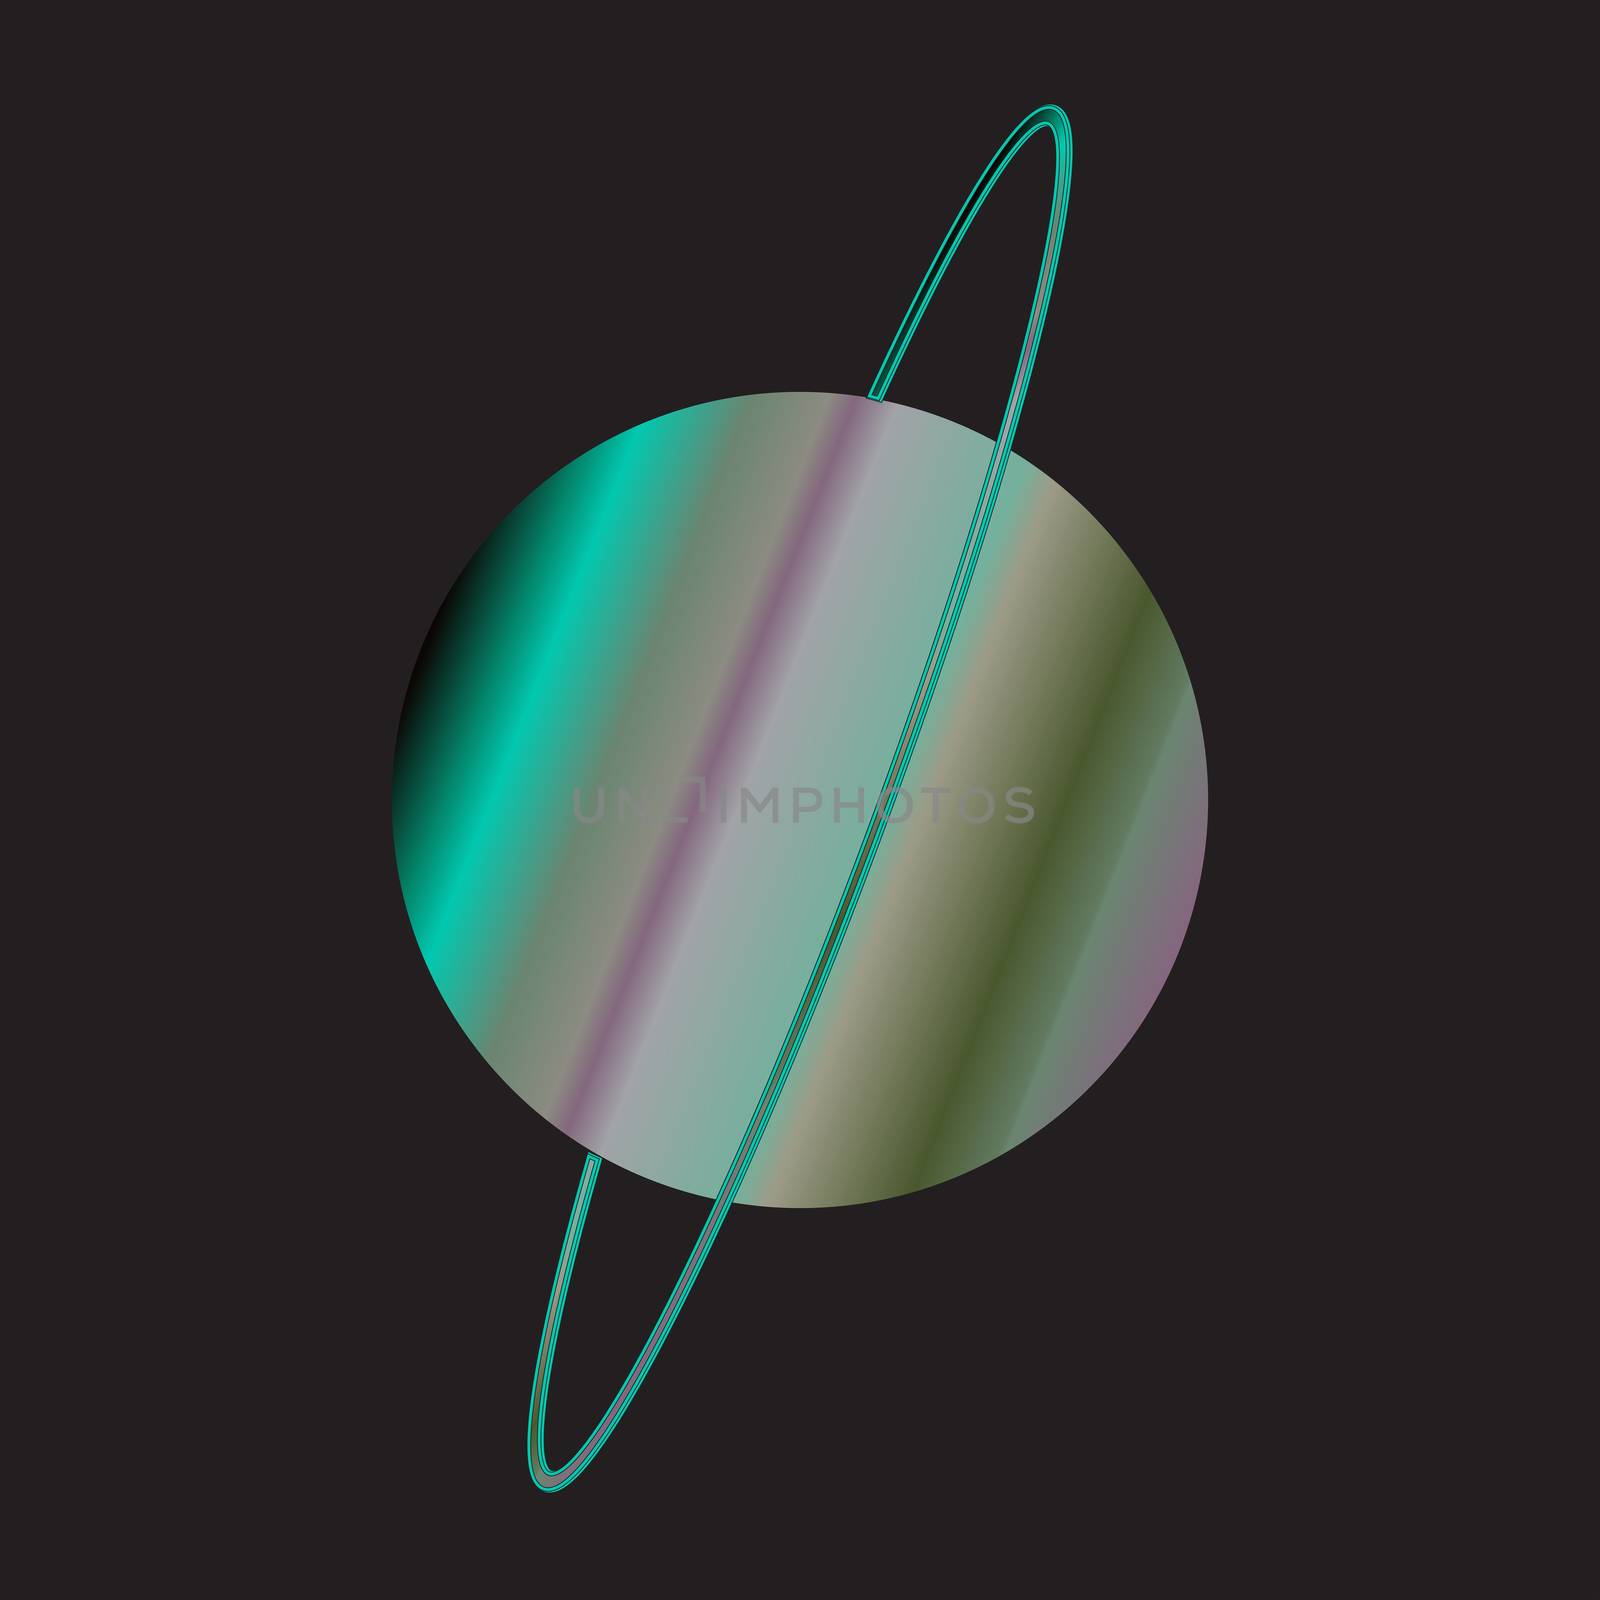 The Planet Uranus With Rings by Bigalbaloo